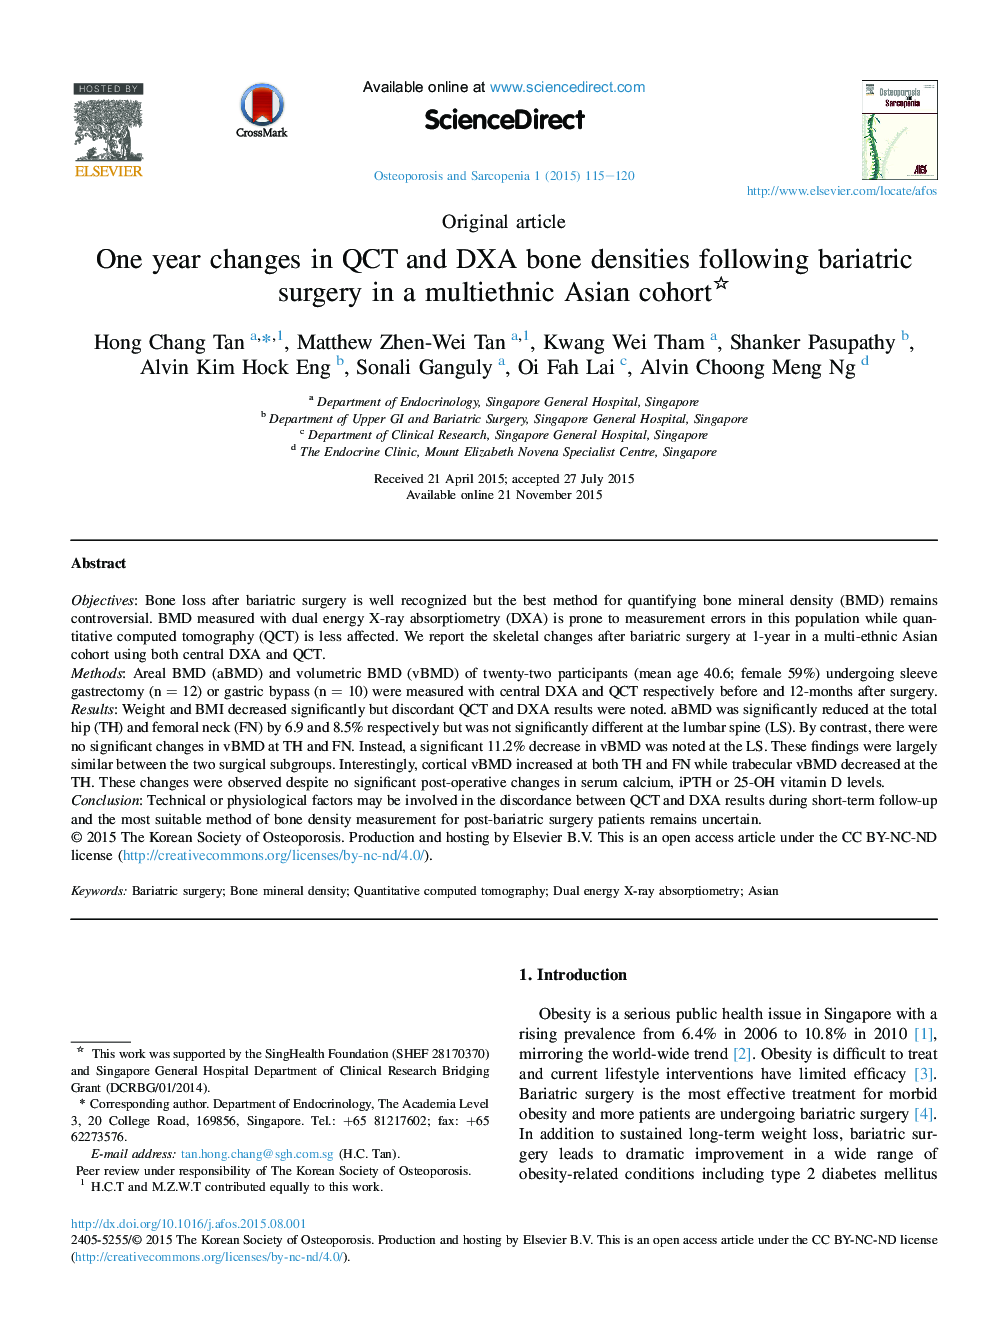 One year changes in QCT and DXA bone densities following bariatric surgery in a multiethnic Asian cohort 